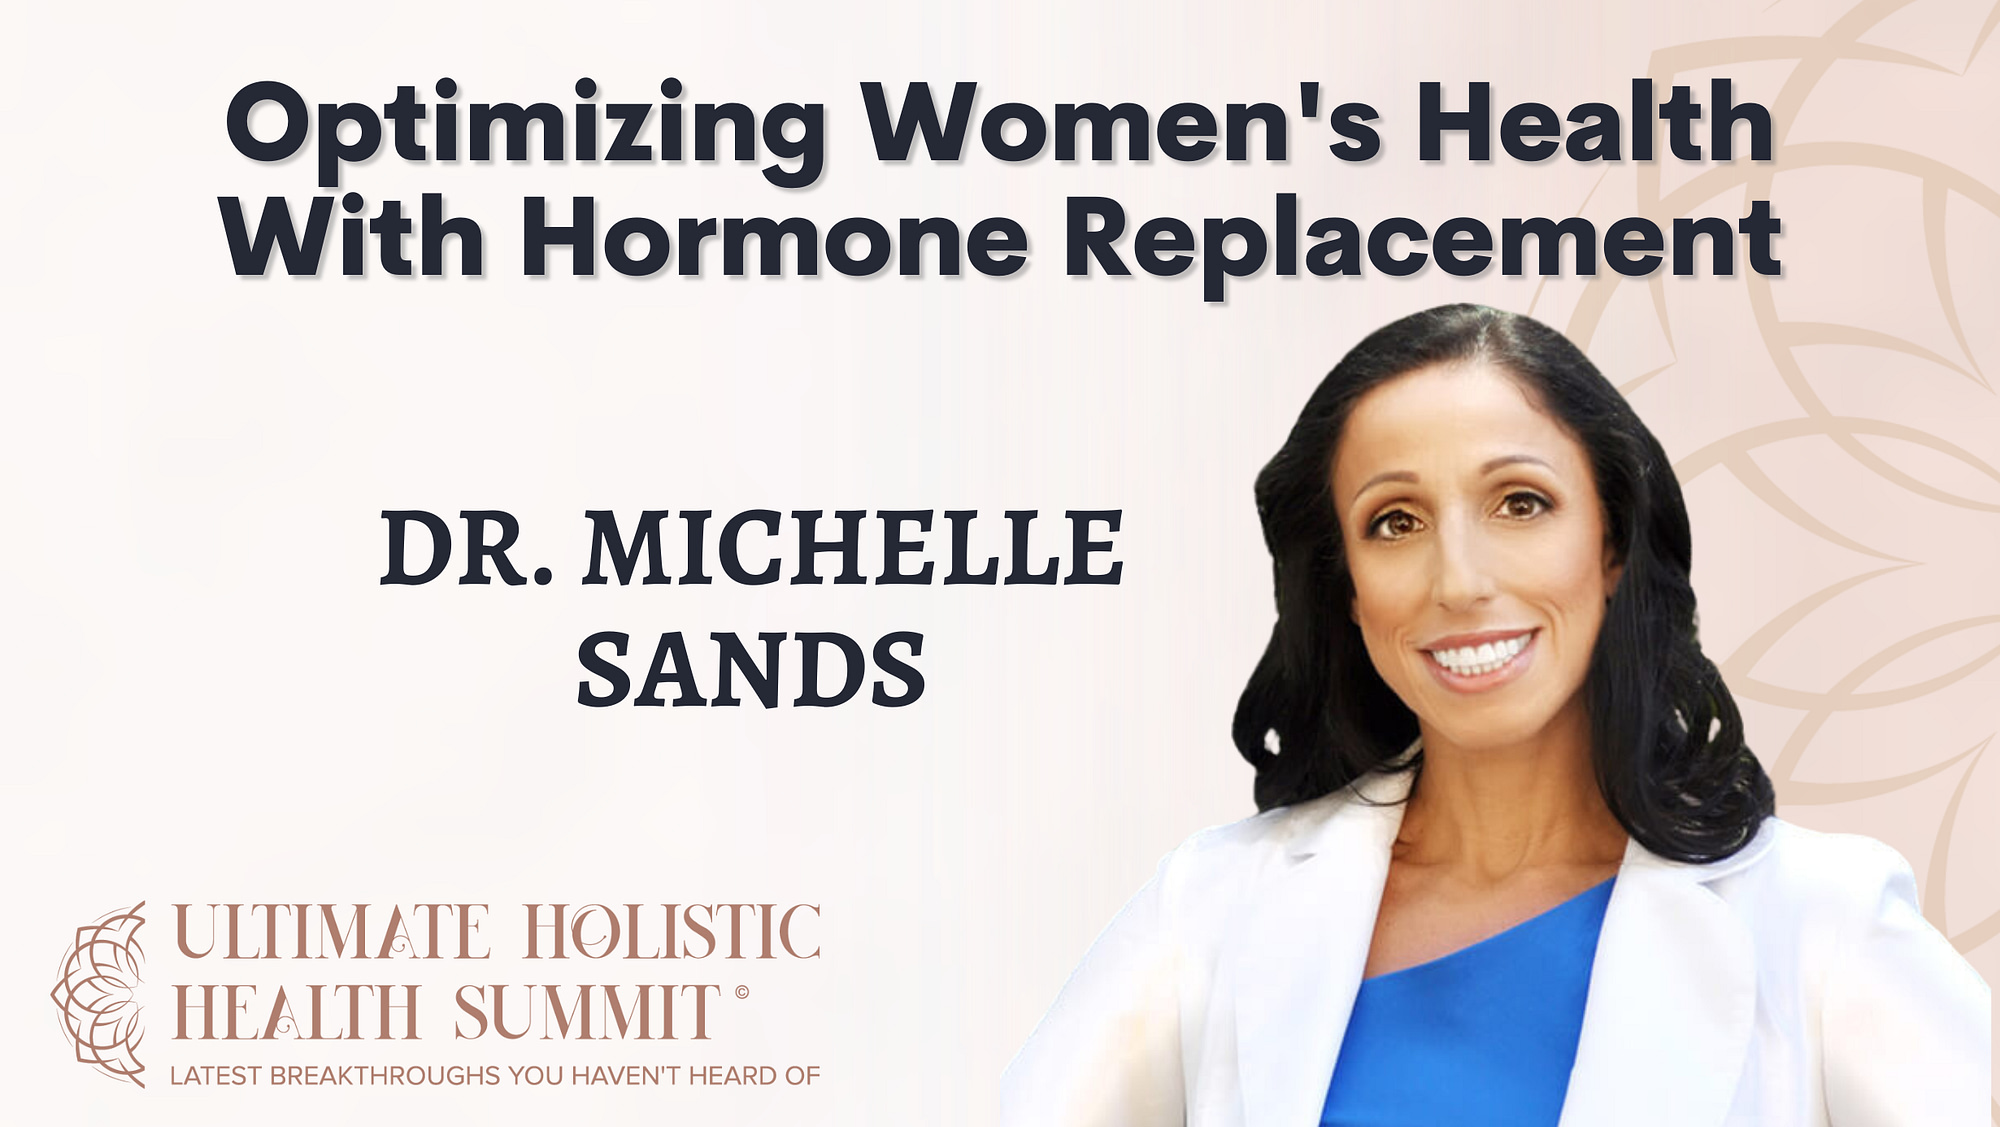 Optimizing Women's Health With Hormone Replacement